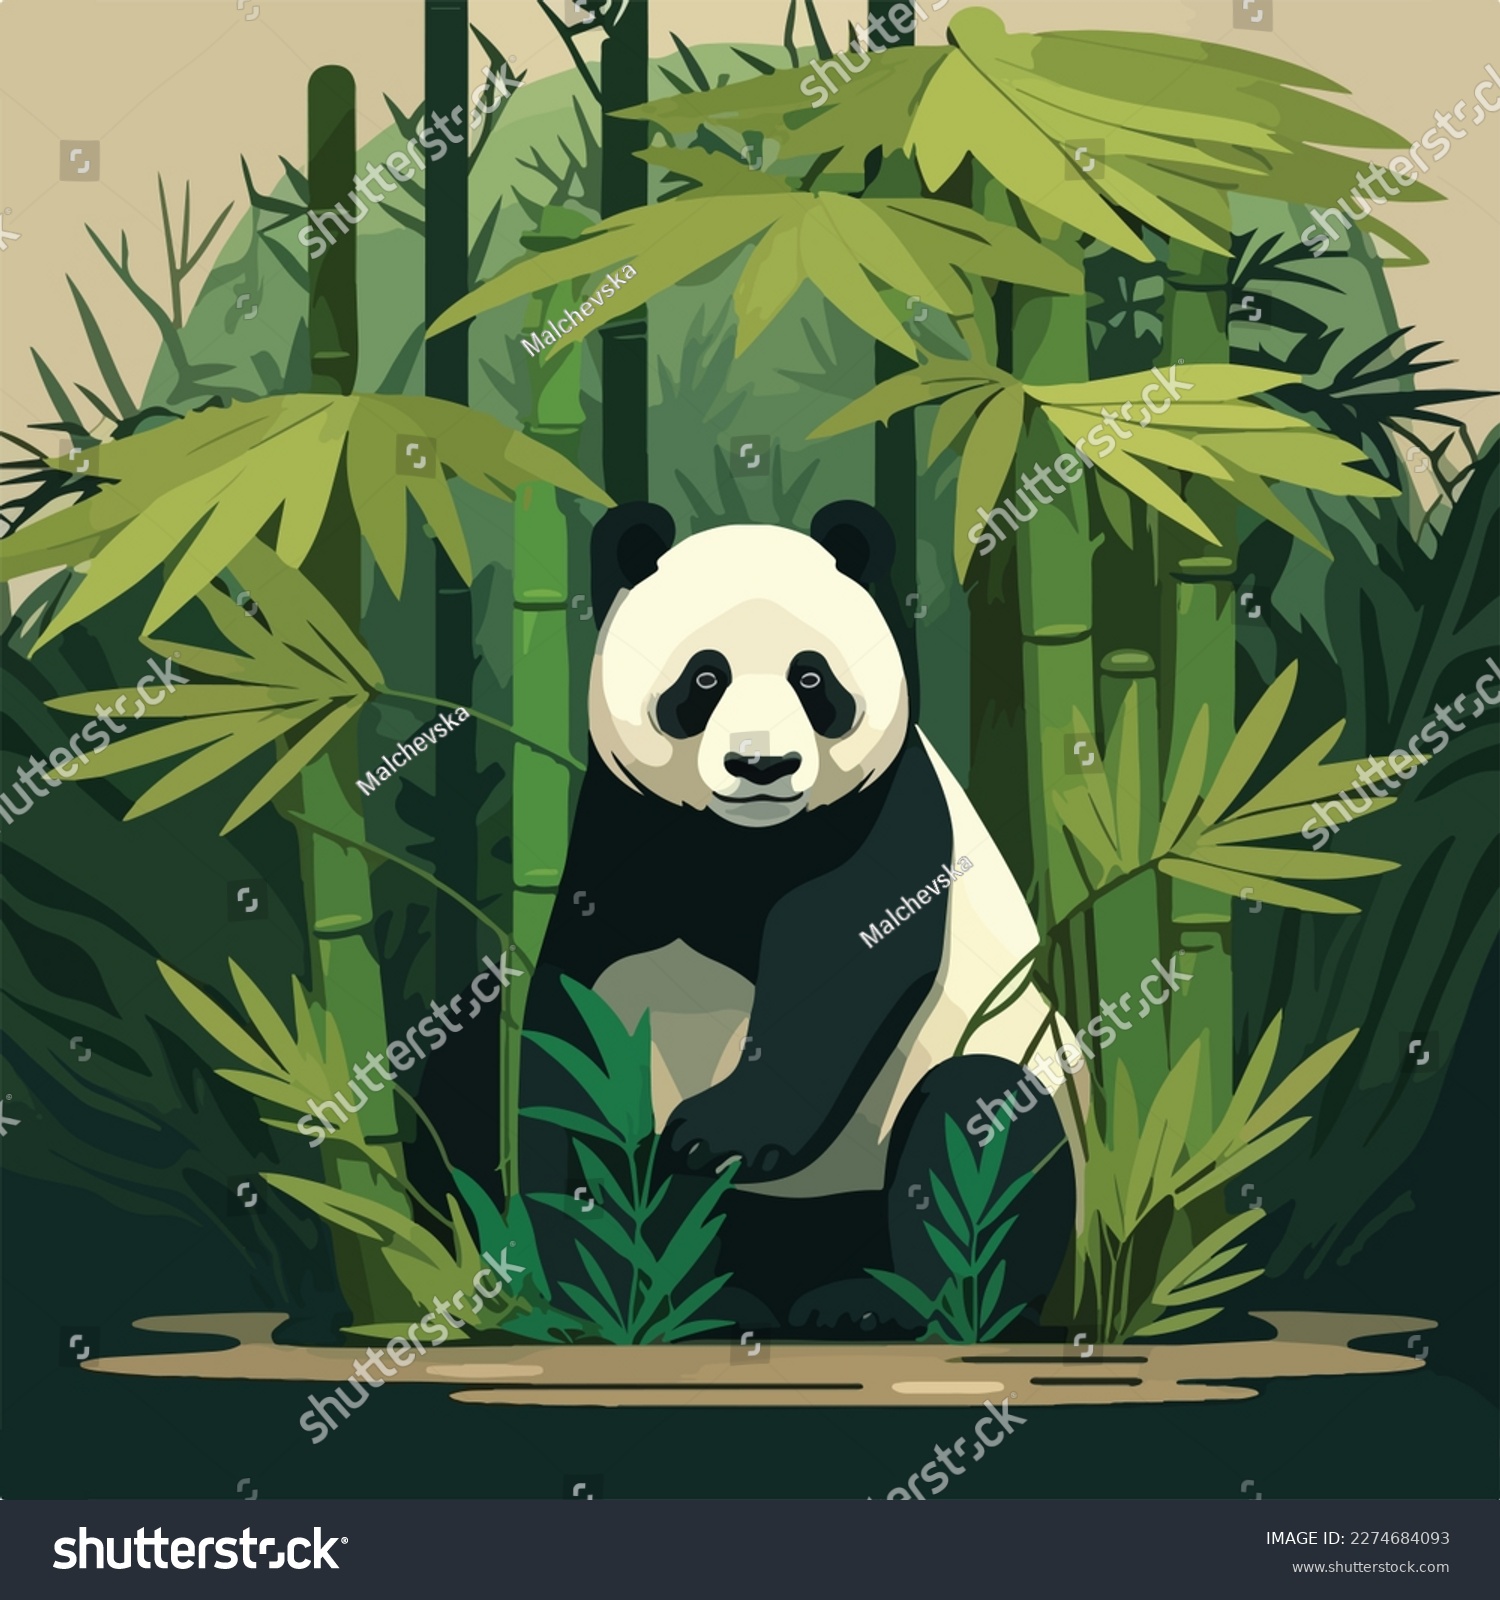 SVG of Giant panda in the bamboo forest. Threatened or endangered species animals. Flat vector illustration concept svg